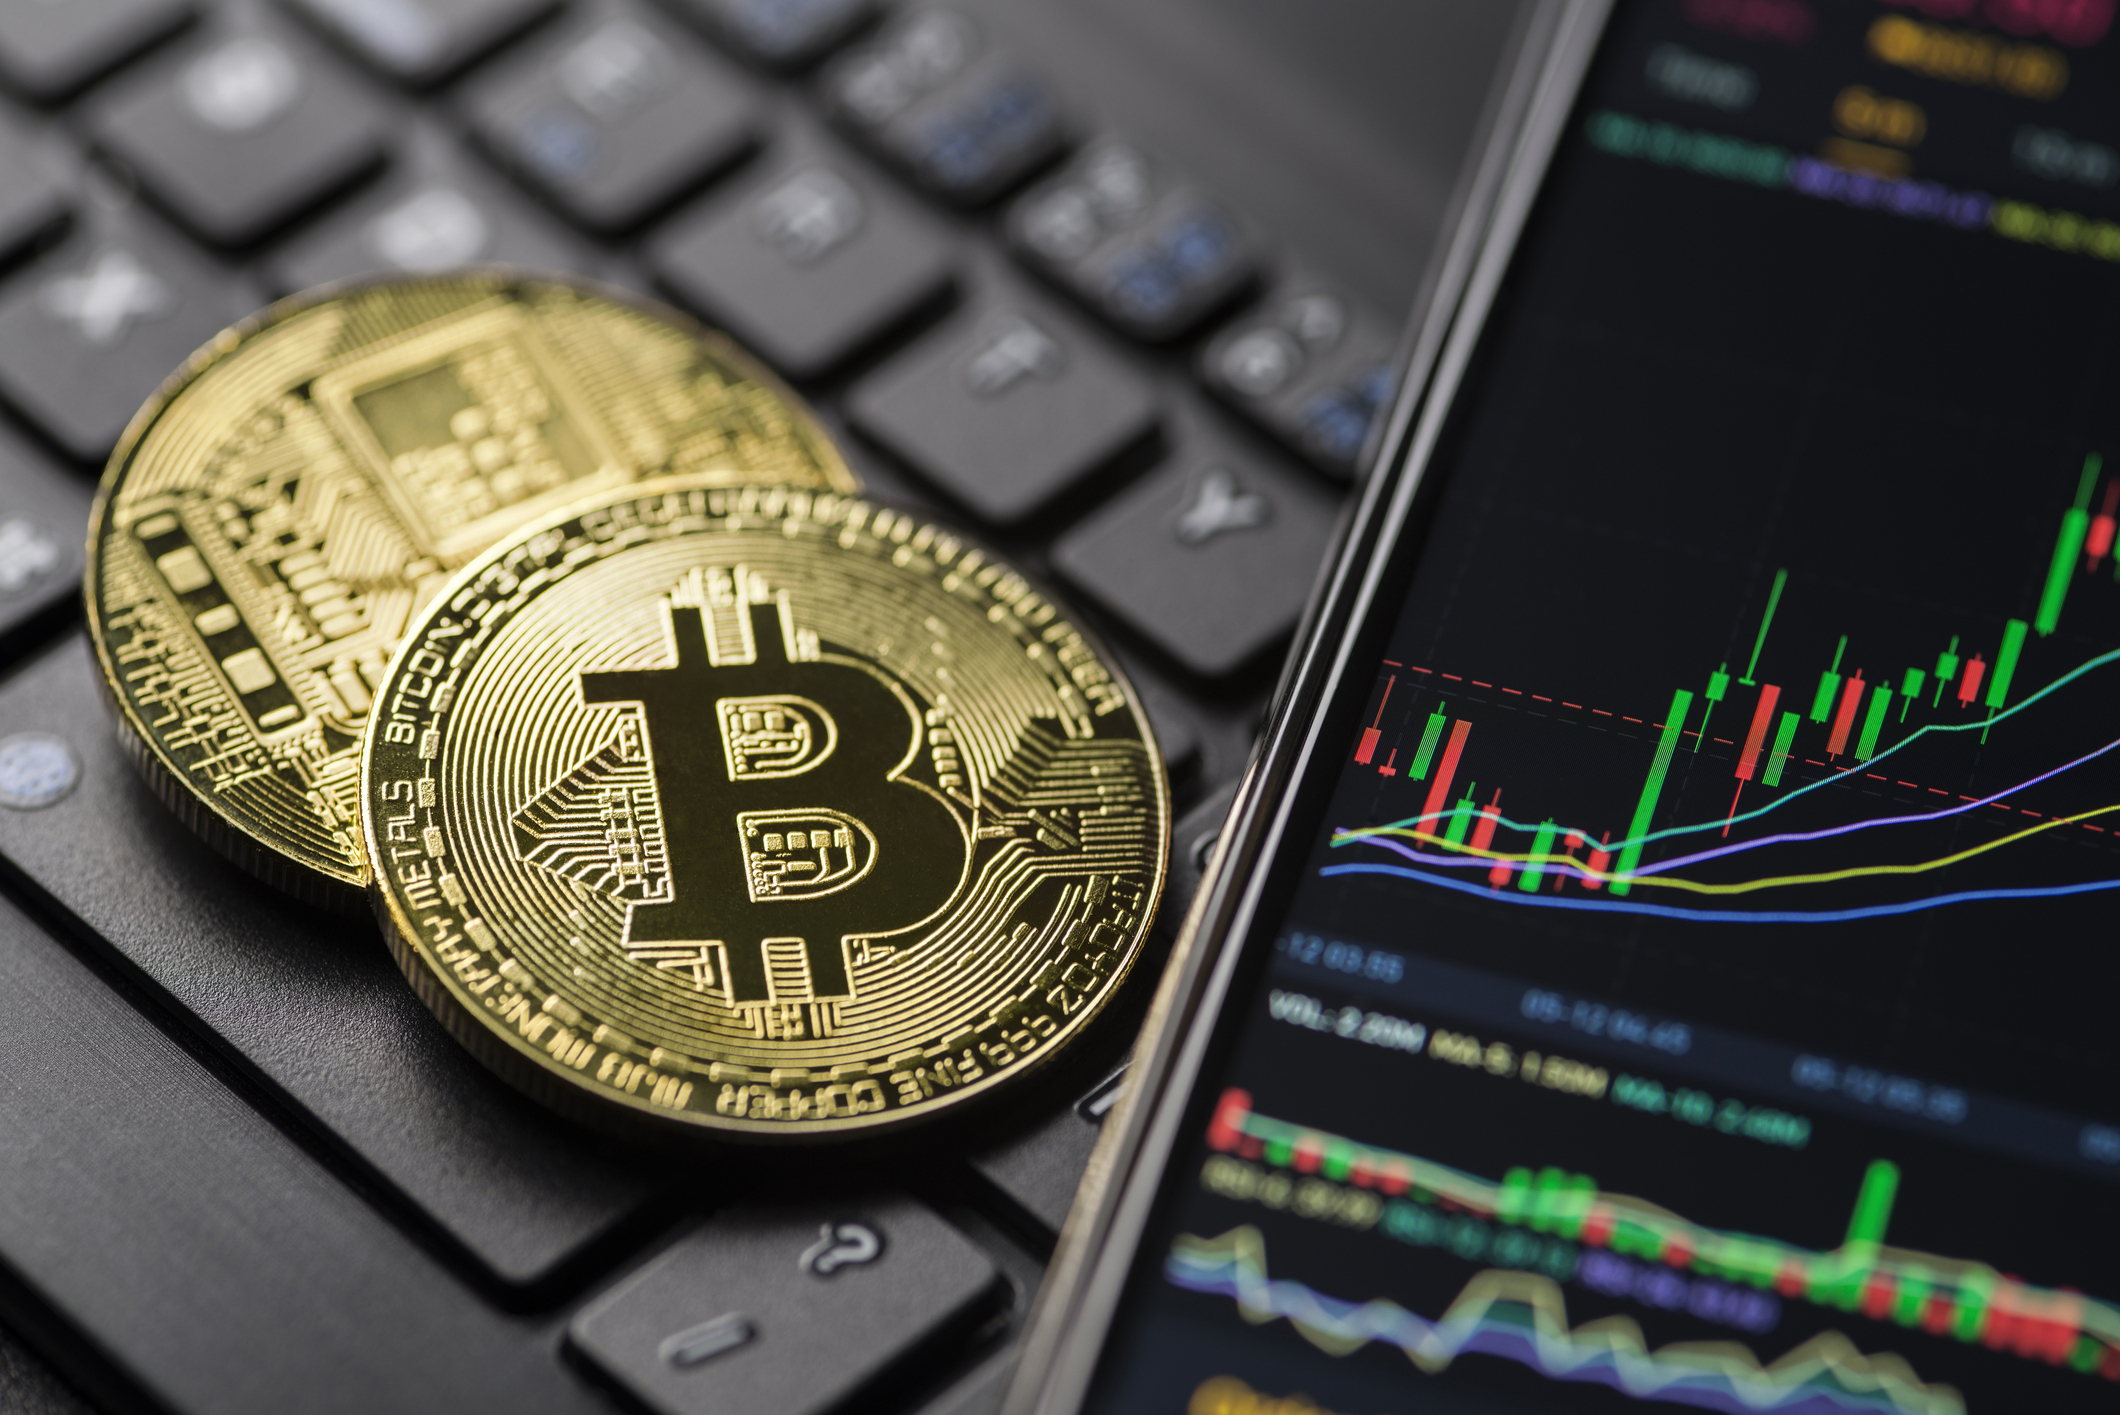 Bitcoin Approaches Risky Territory As Halving Event Draws Near